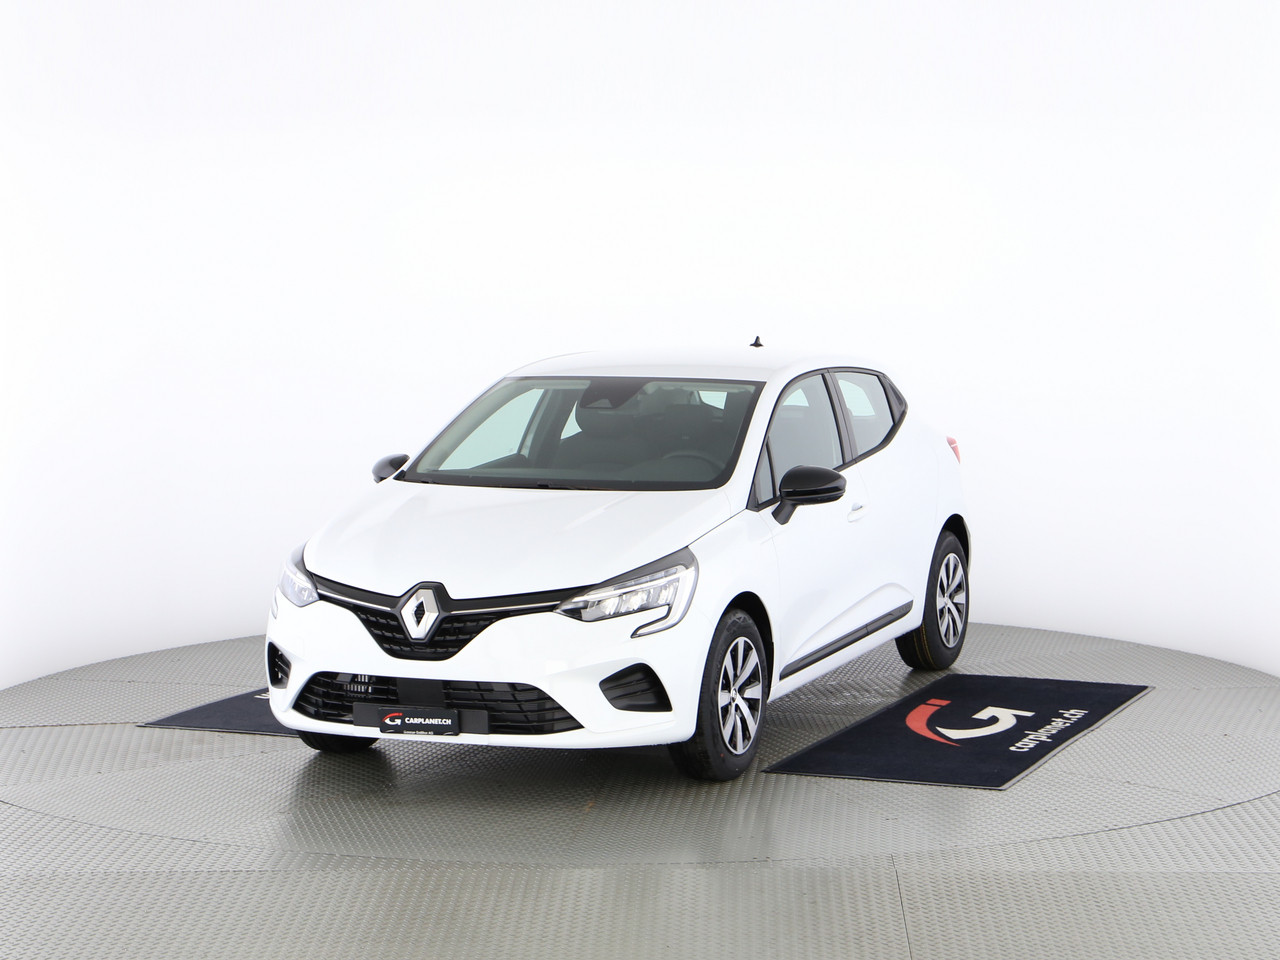 Renault Clio 1.0 TCe equilibre